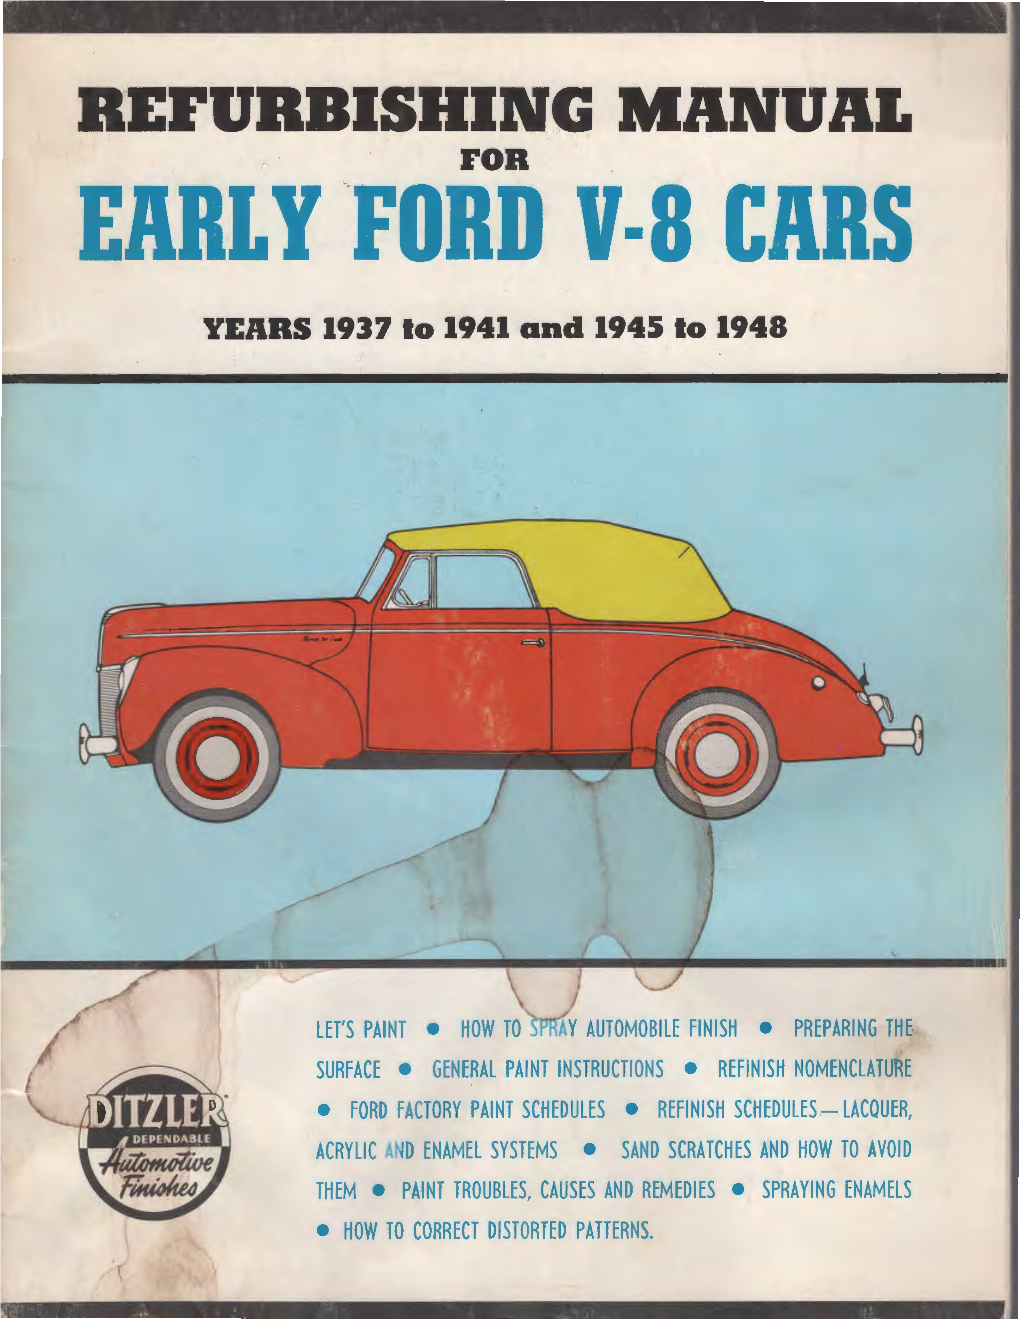 Early Ford V-8 Cars